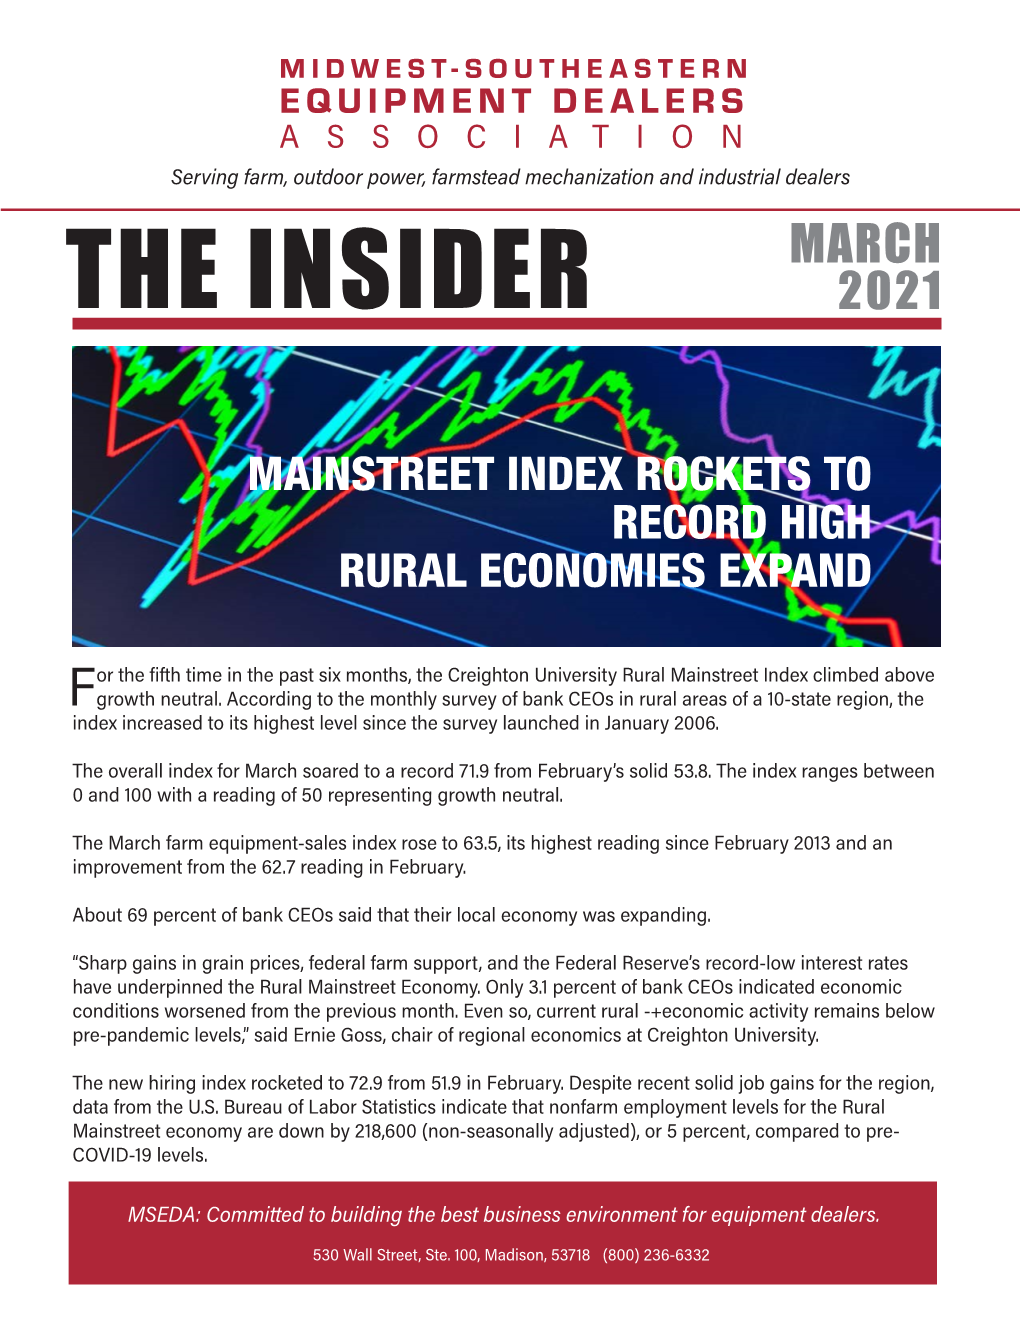 The Insider – March 2021